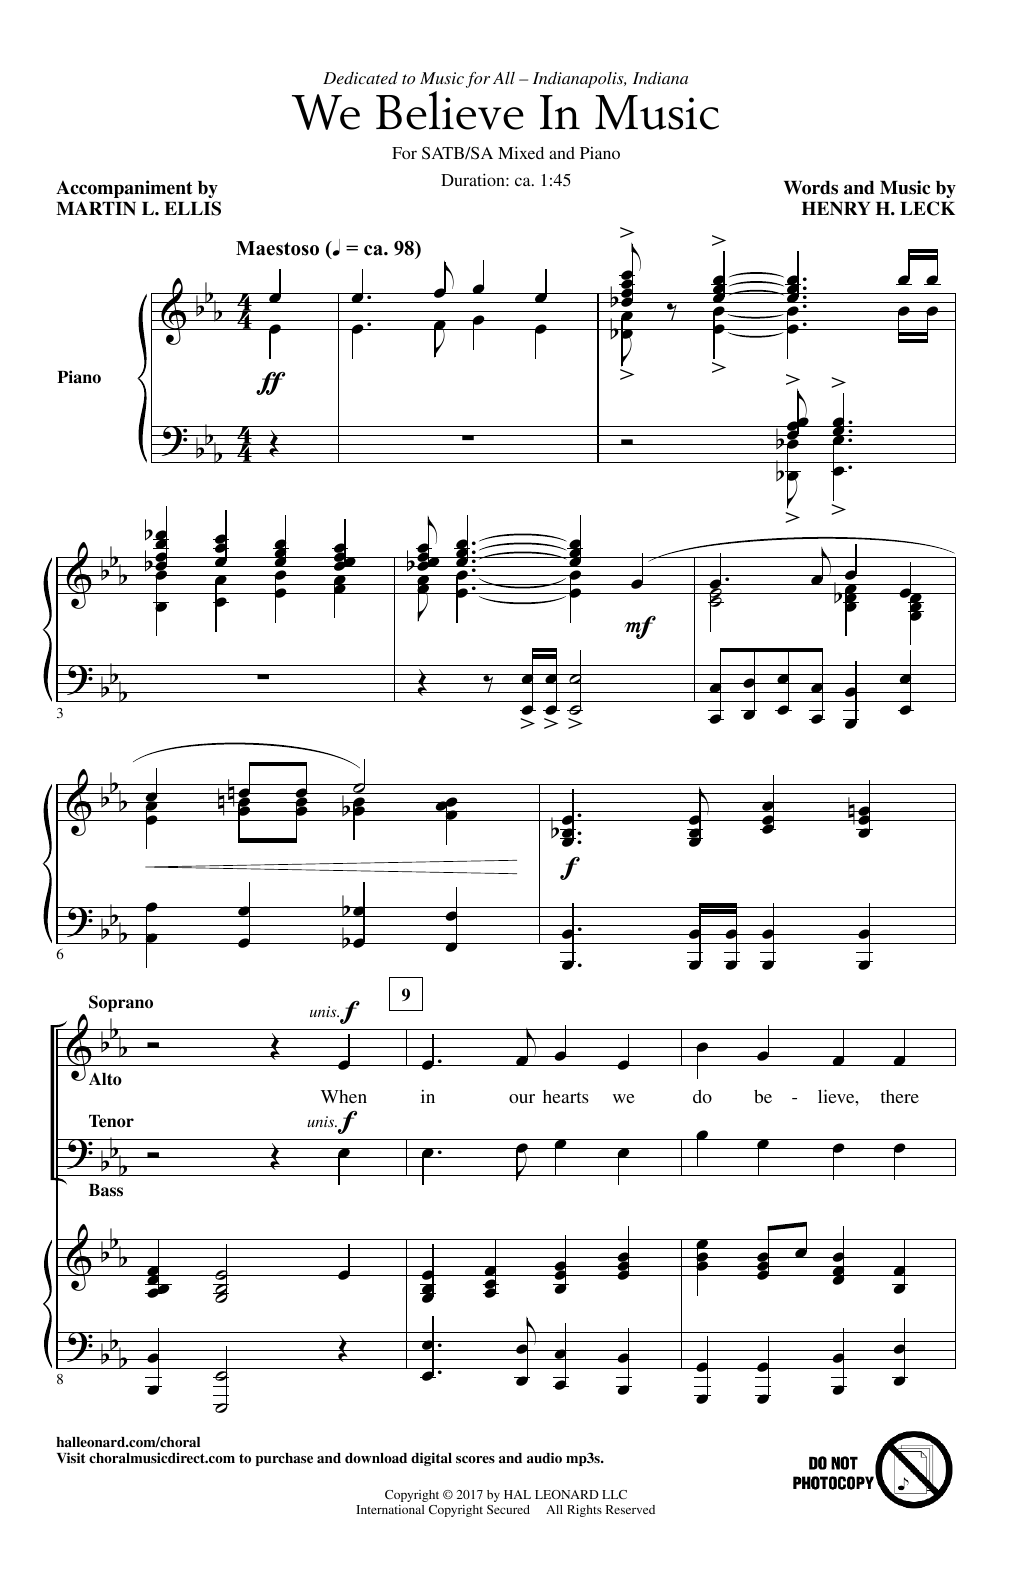 Download Henry Leck We Believe In Music Sheet Music